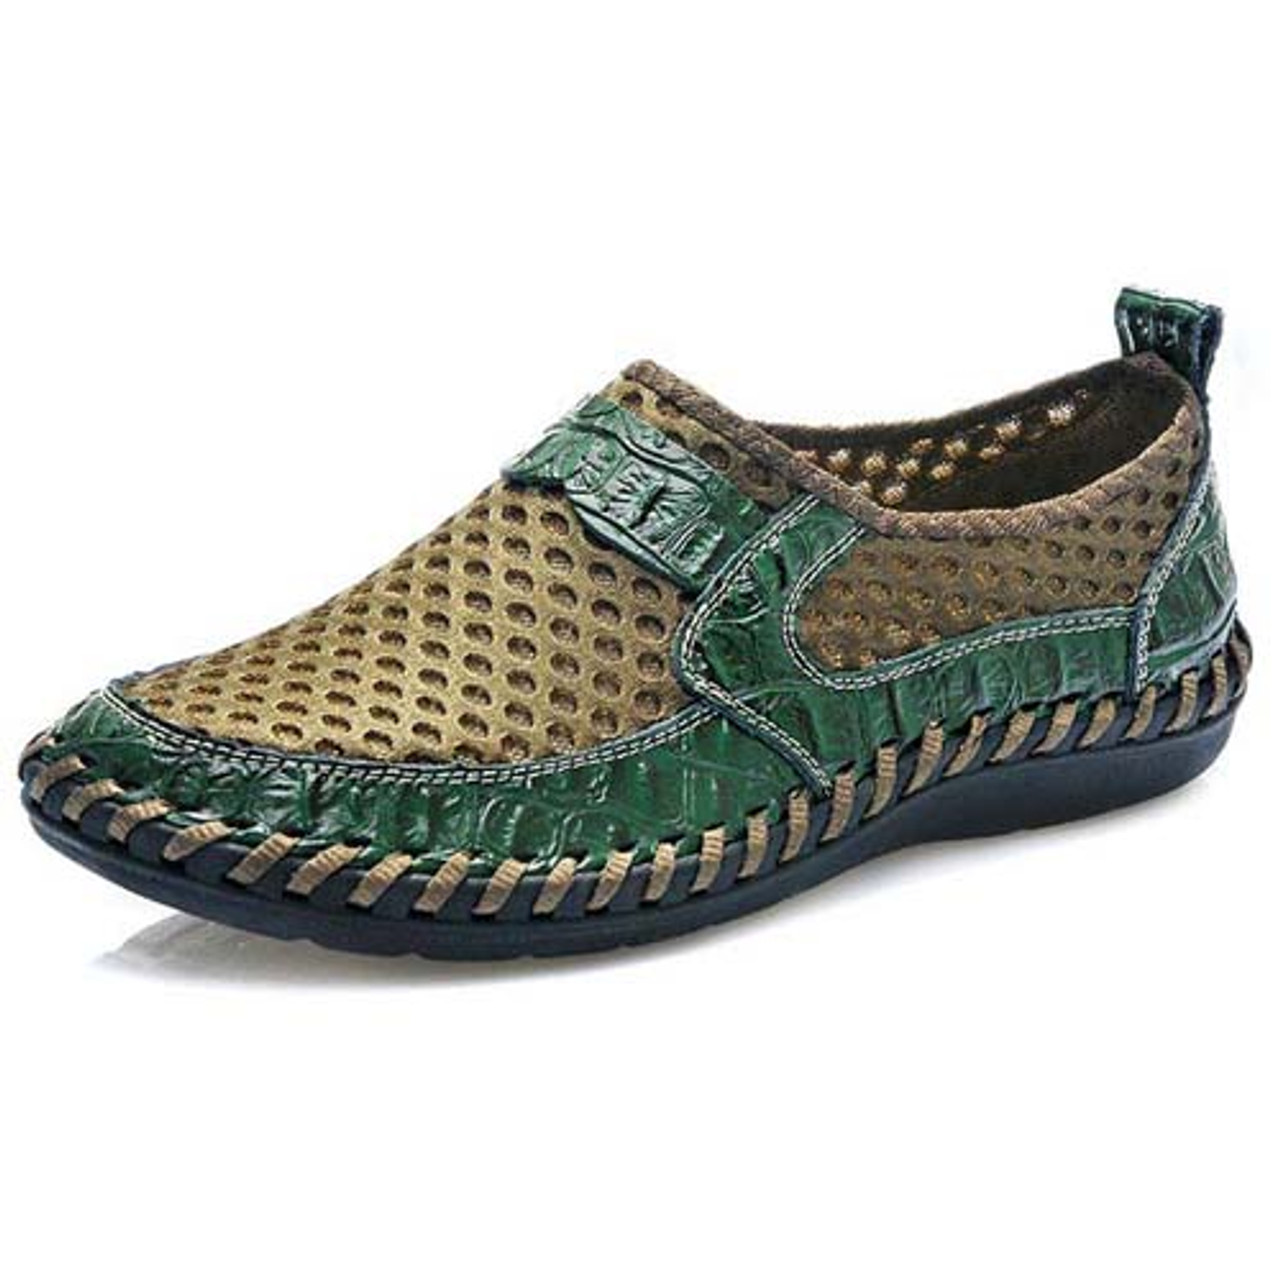 Men's green casual mesh leather slip on shoe | Mens slip on loafers shoes  online | 1021MS